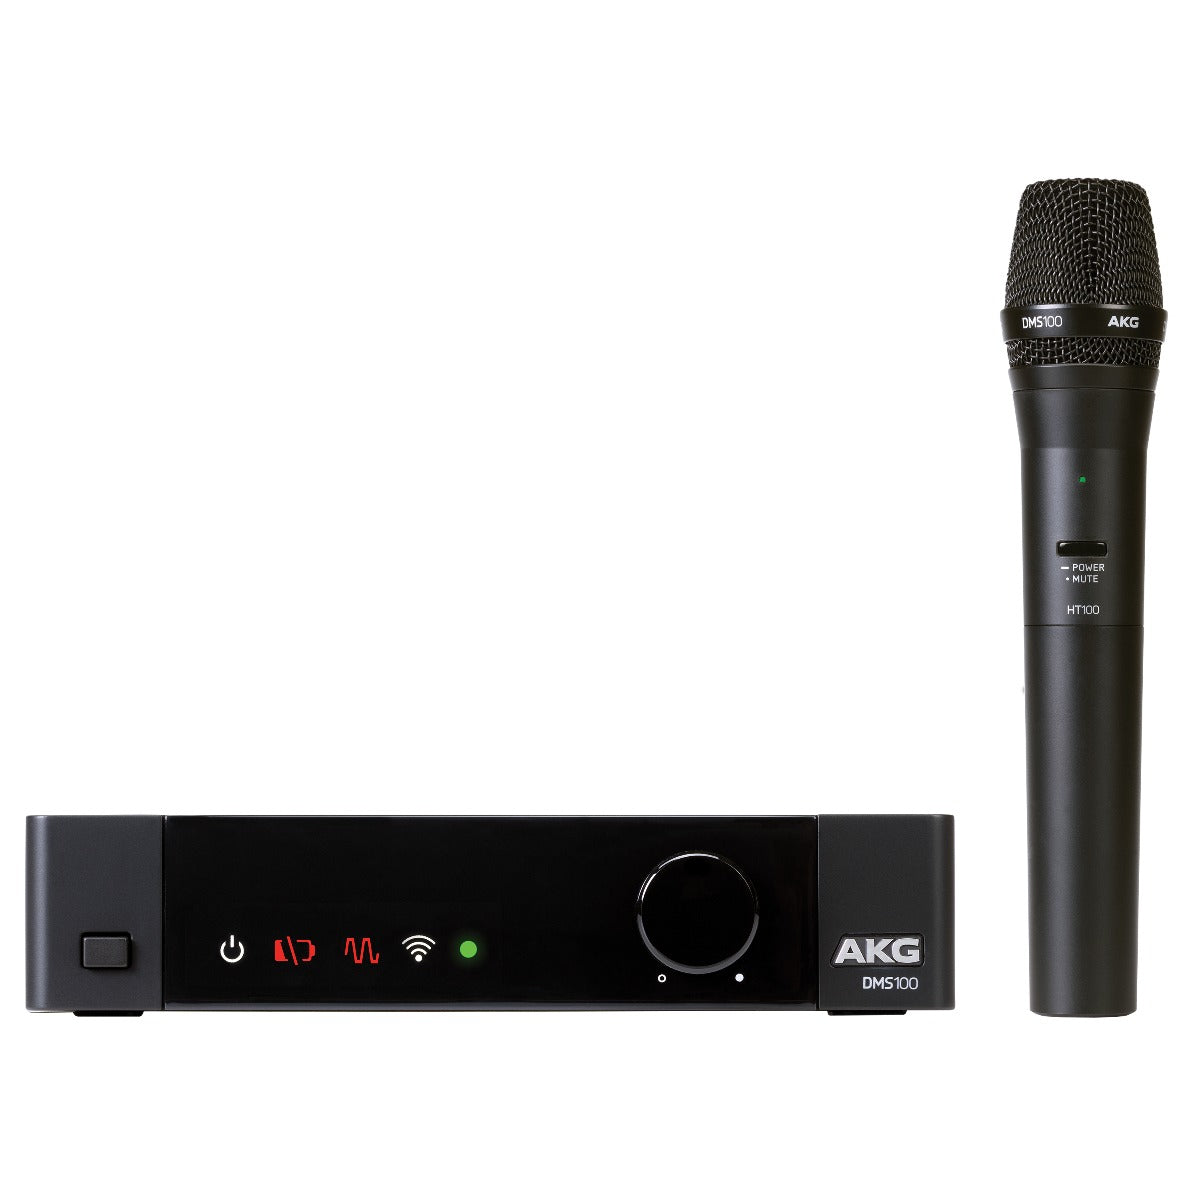 Image of the AKG DMS100 Handheld Microphone Wireless System